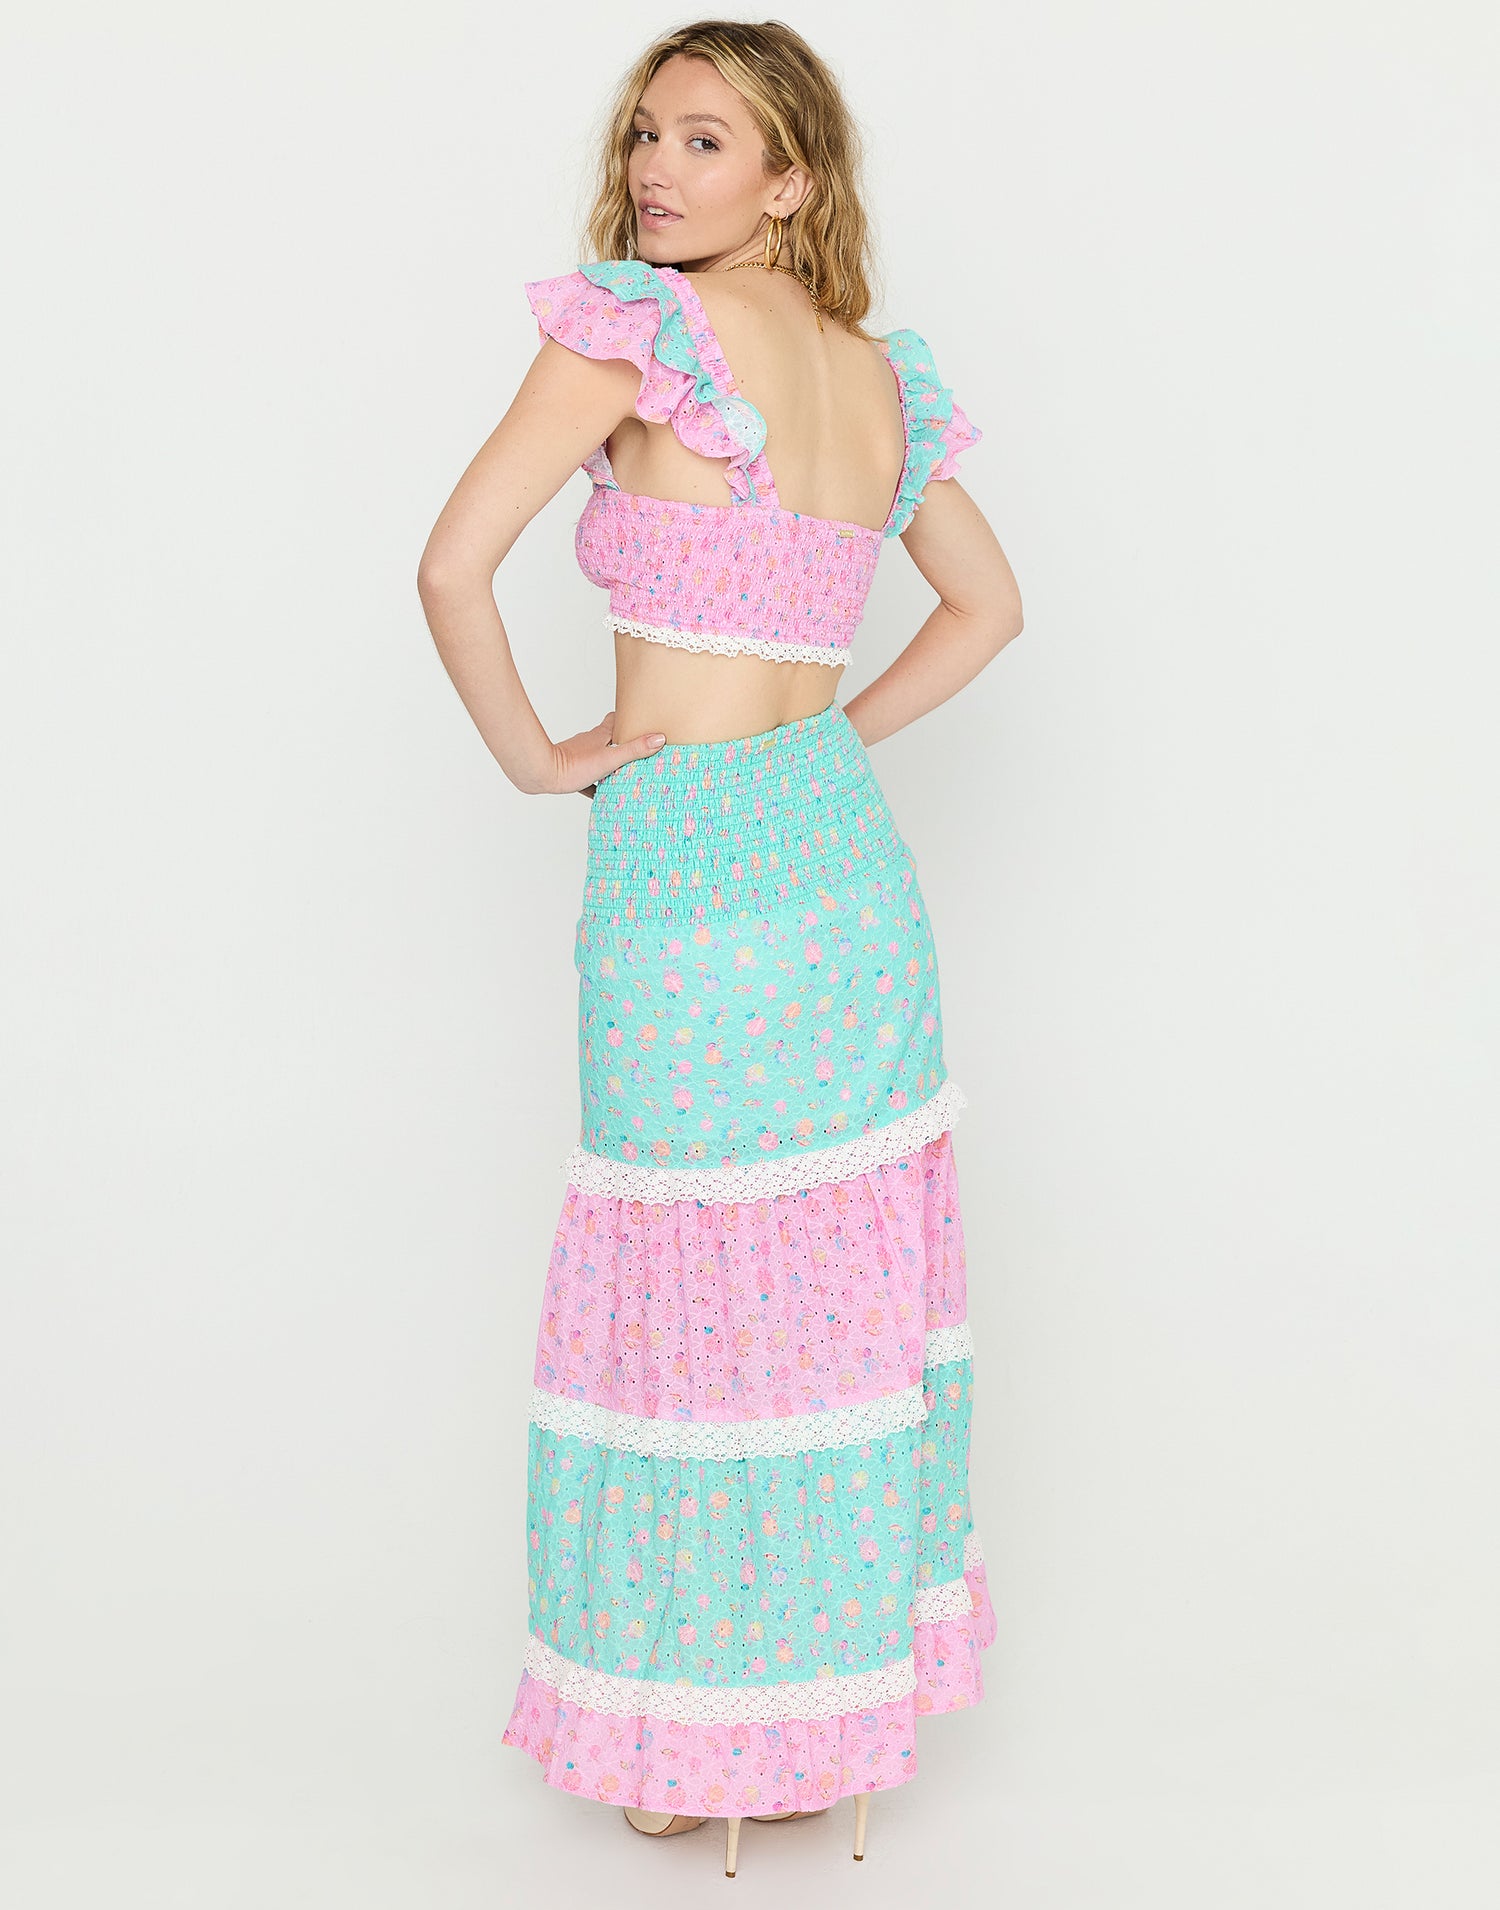 Everette Maxi Skirt in Pink Ditsy Shell with Smocked High Waistband & Crochet Trims - Back View